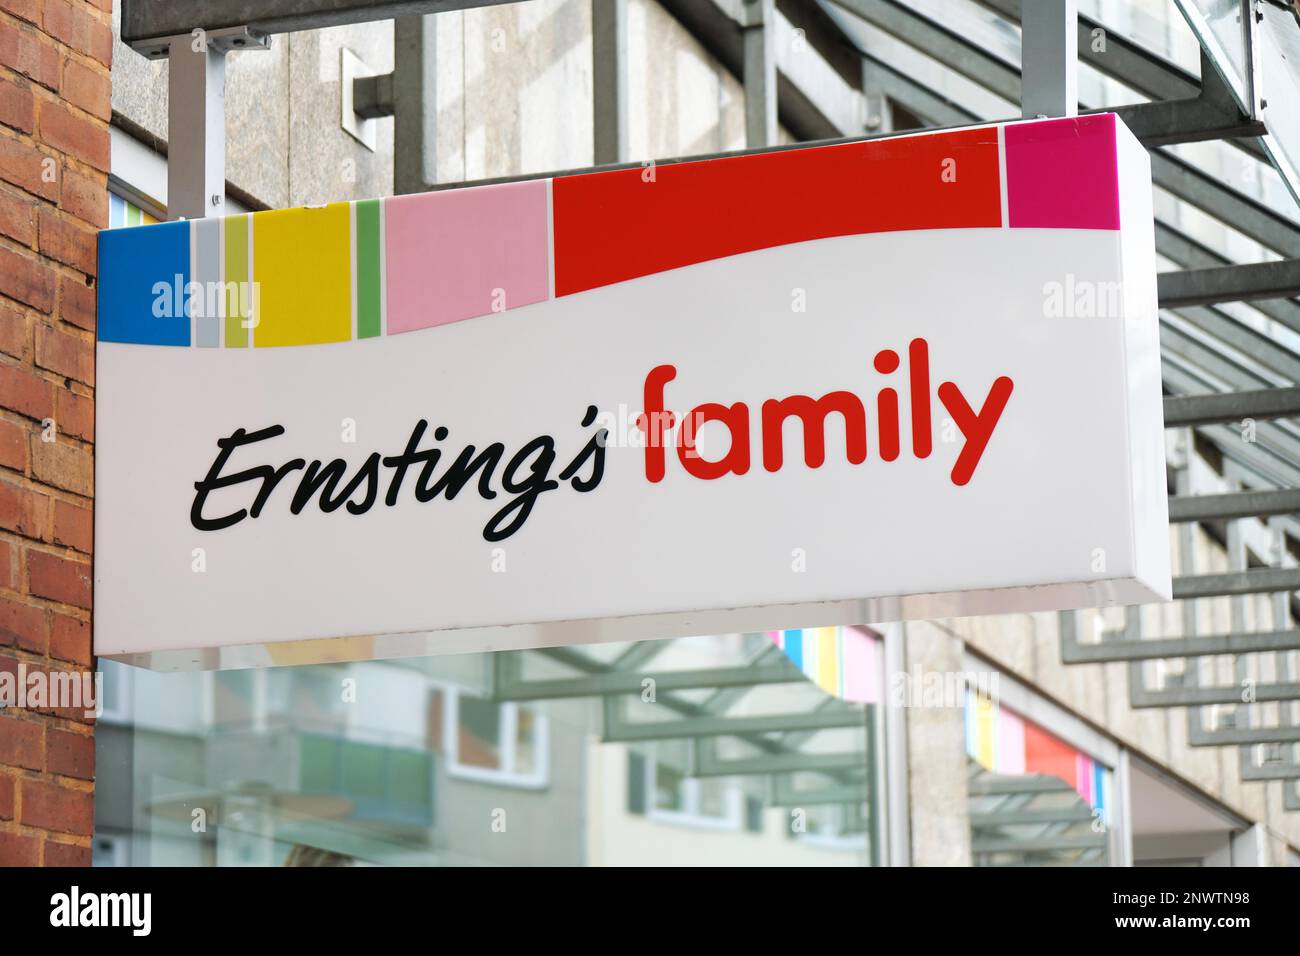 Hannover, Germany - October 8, 2017: Ernstings Family brand logo sign and fashion chain store Stock Photo